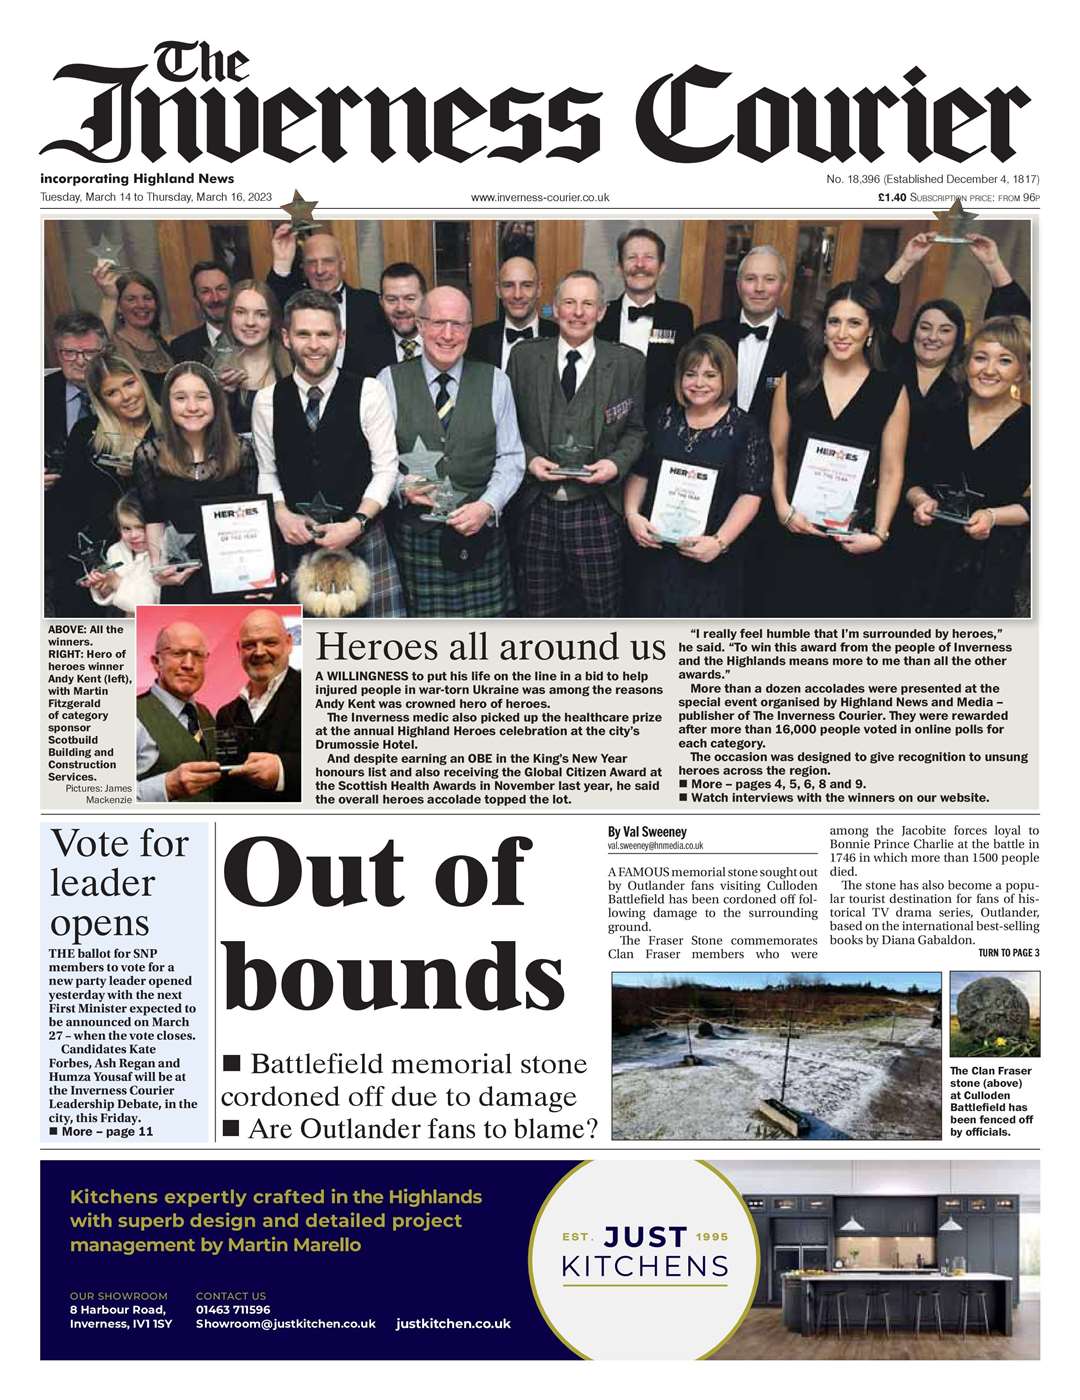 The Inverness Courier, March 14, front page.